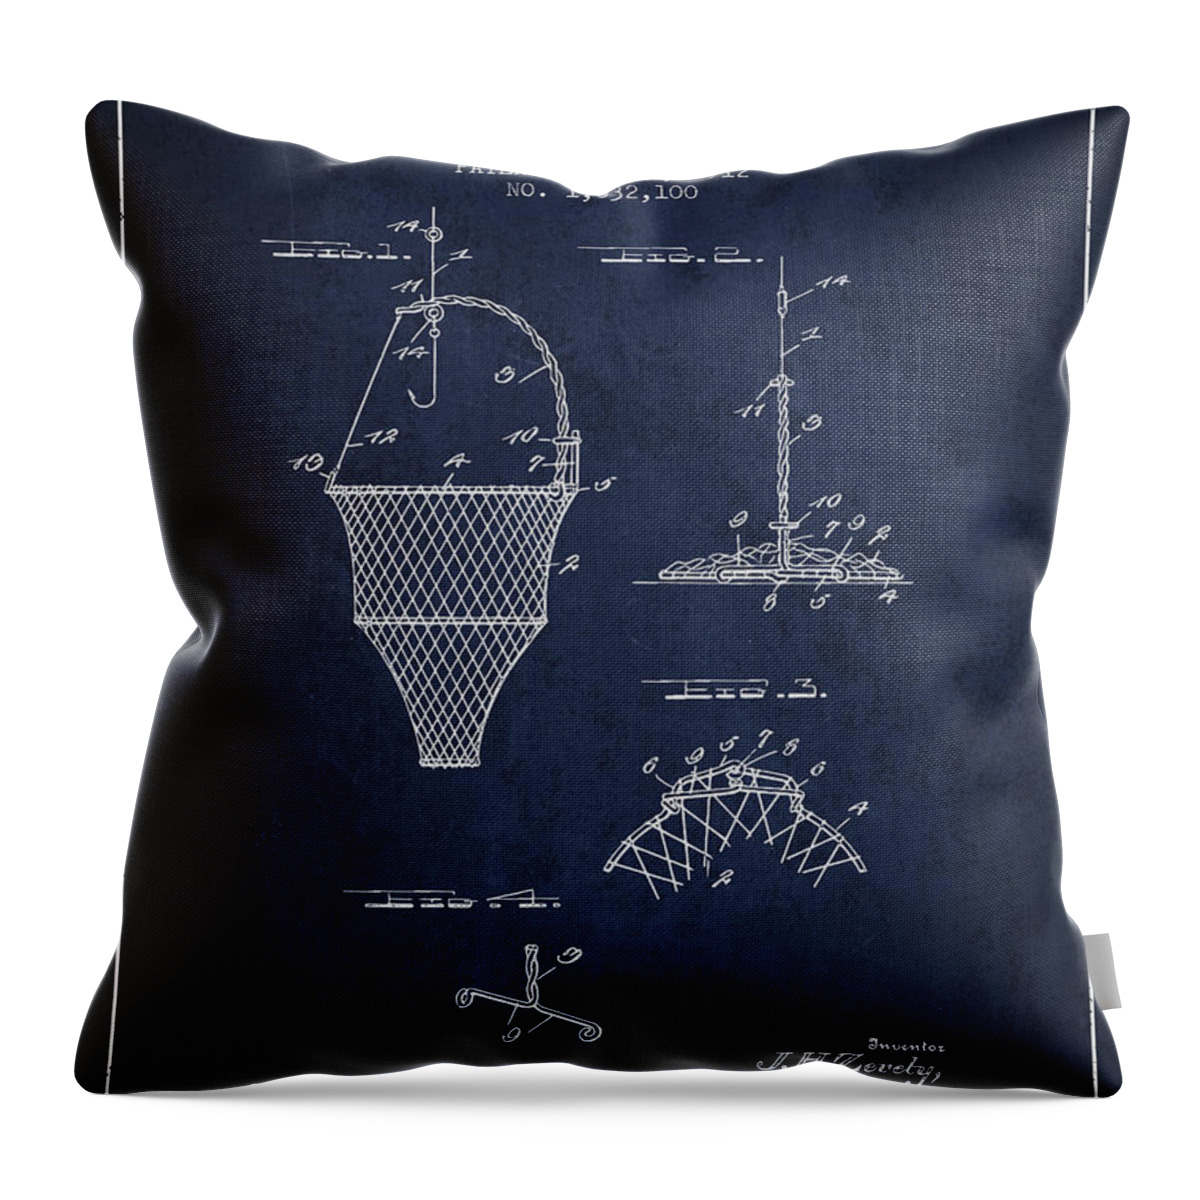 Fishing Net Throw Pillow featuring the digital art Fishing Tackle Patent from 1912 - Navy Blue by Aged Pixel